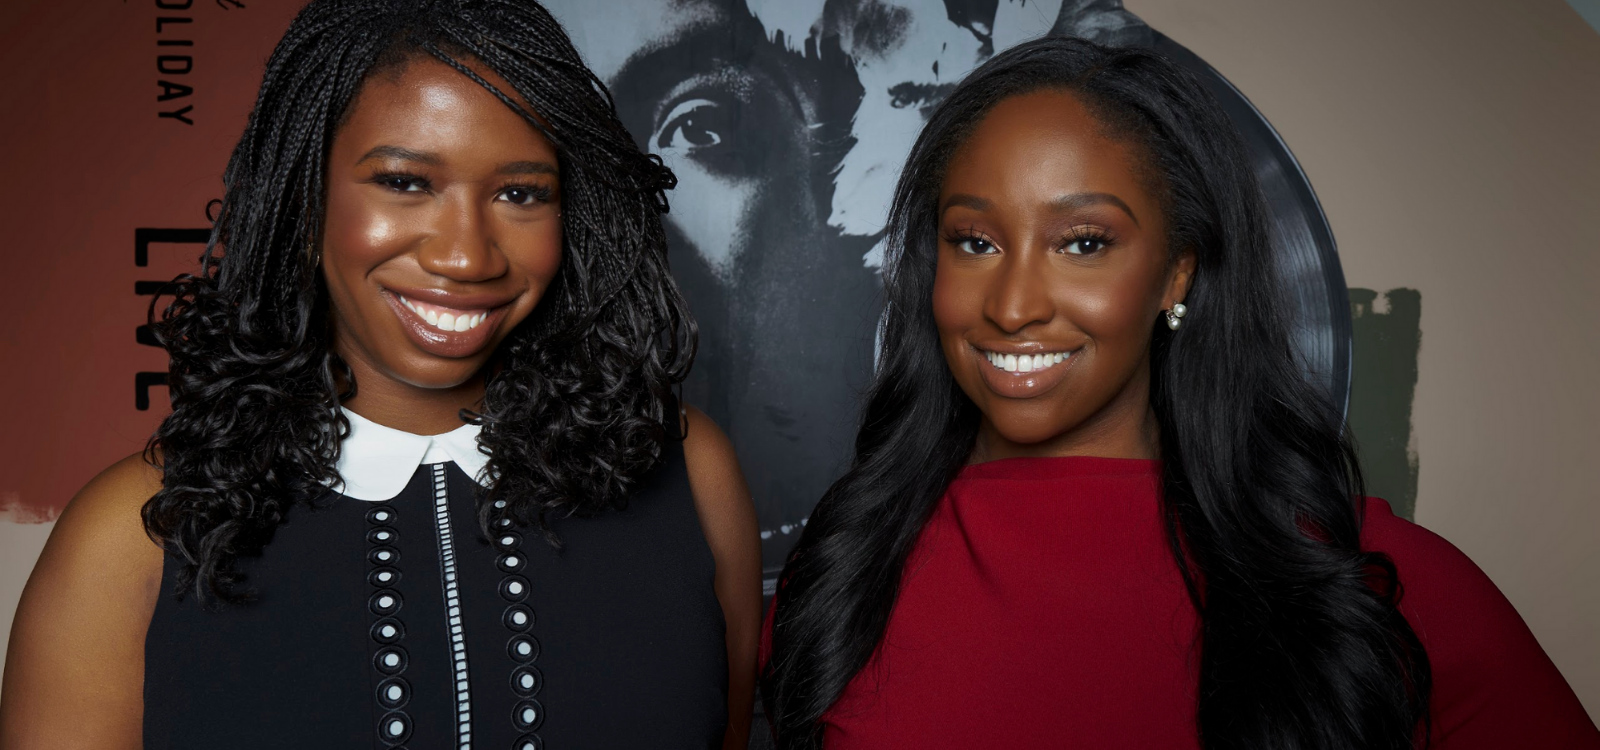 Funding Black Beauty Tech Founders Should Be a No-Brainer